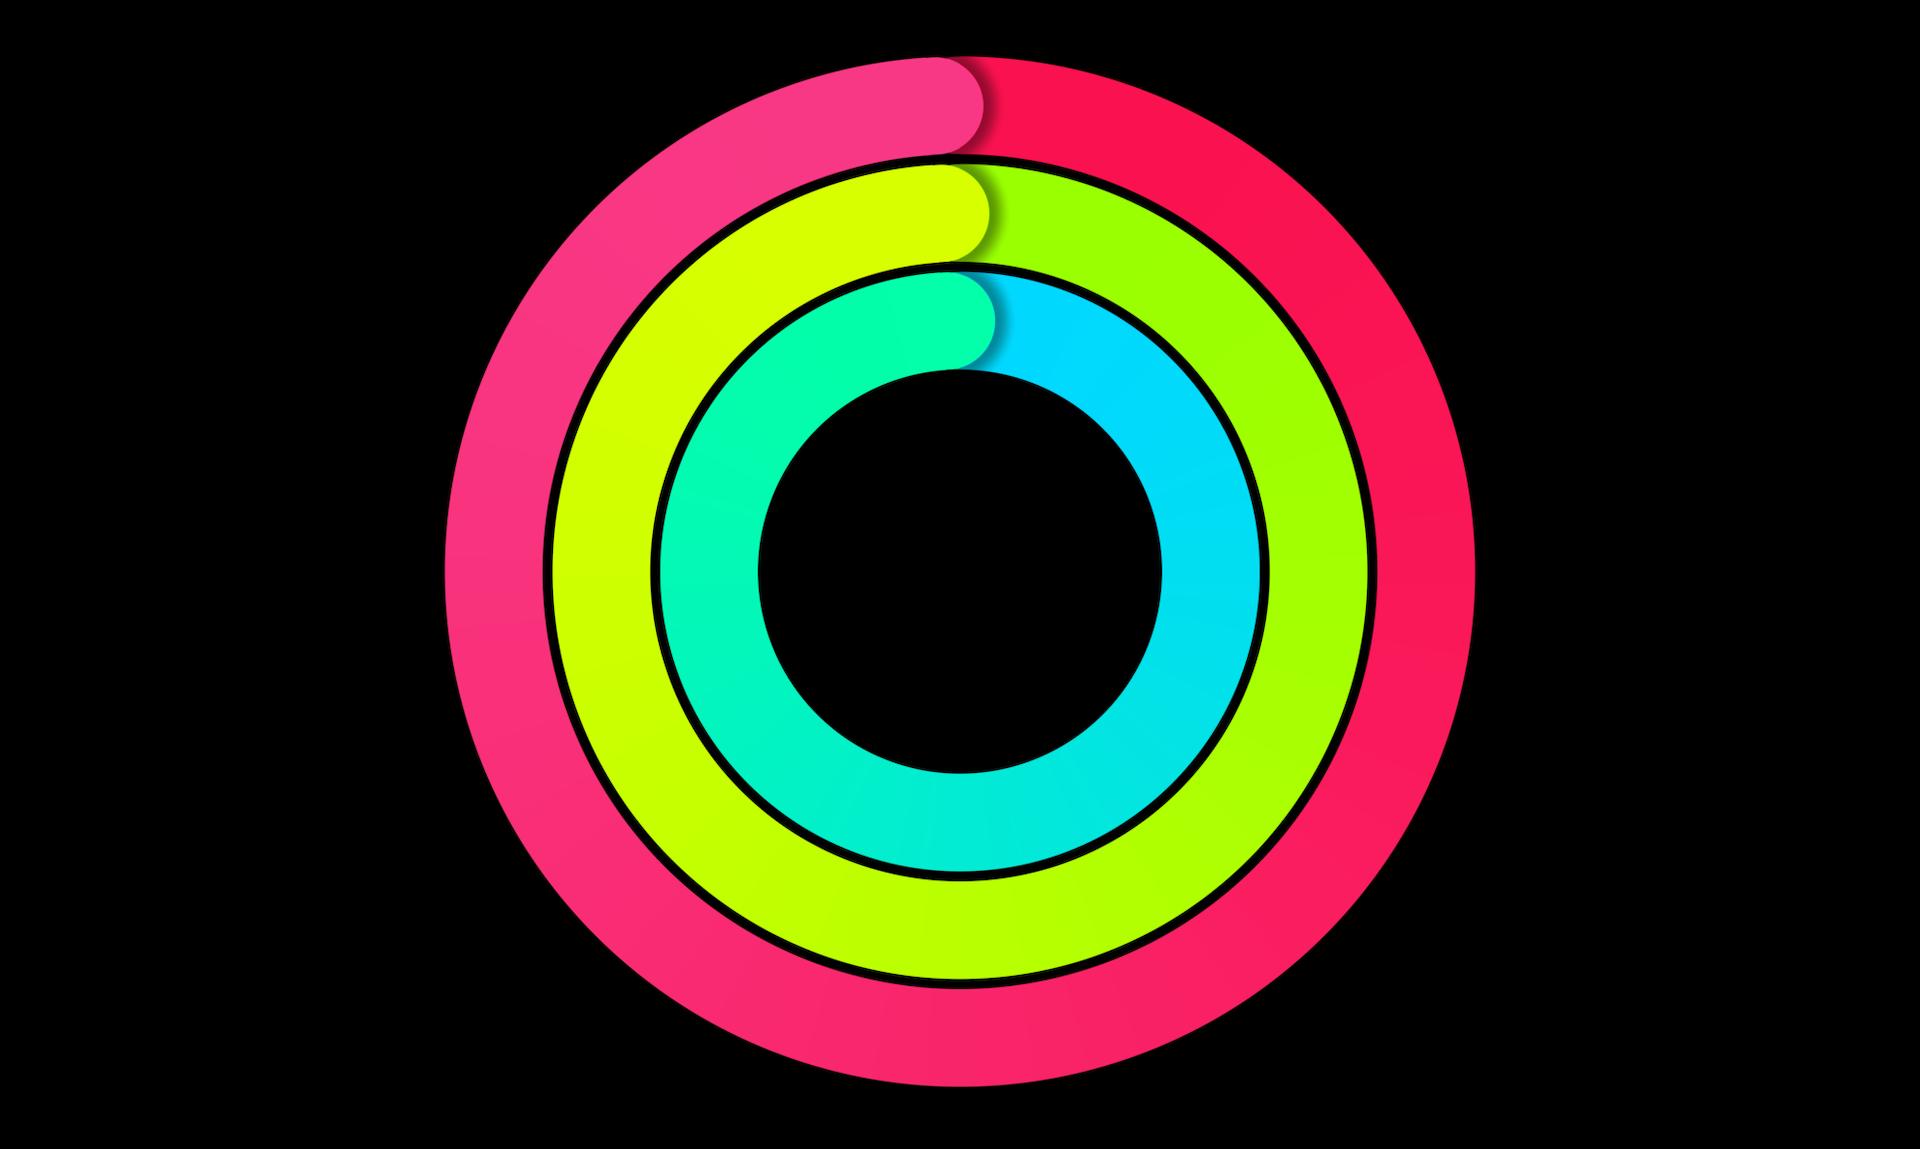 Figure 1. A sample activity ring